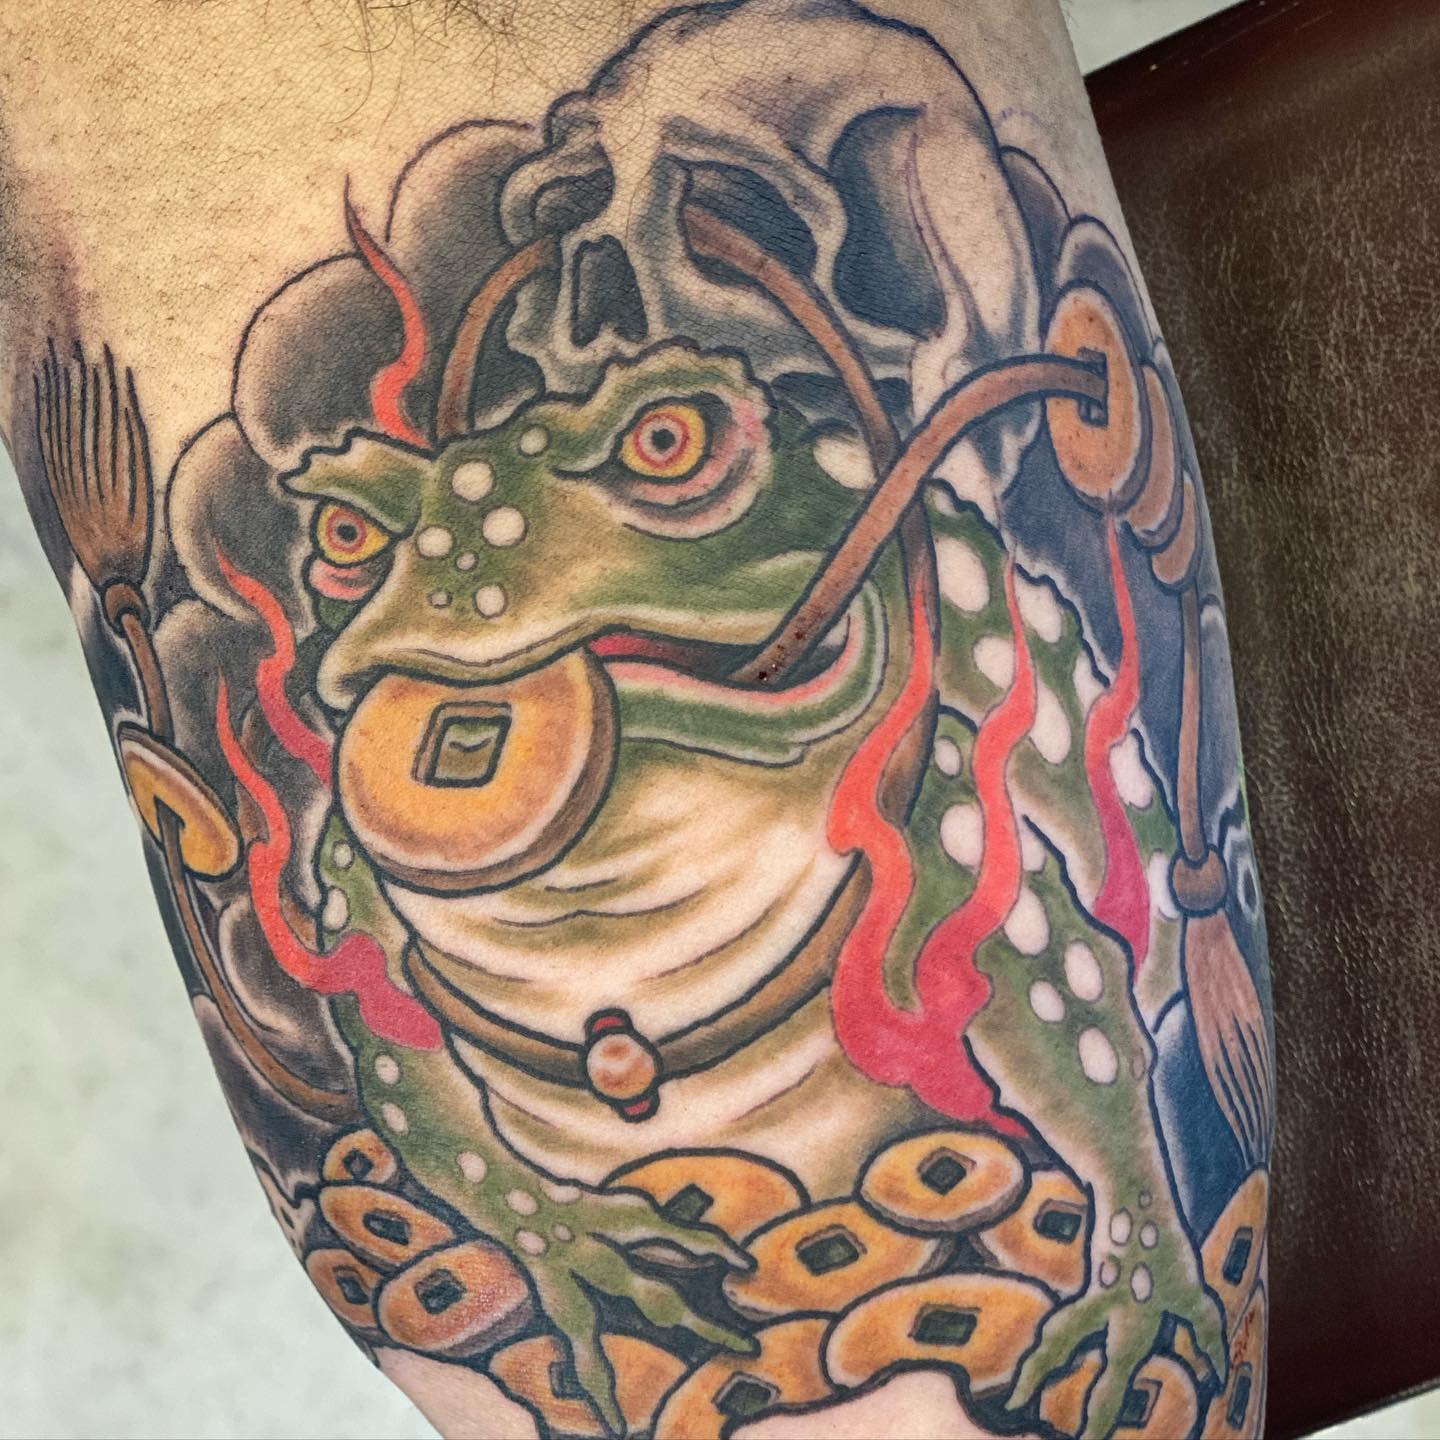 Wild Ones Tattoo on Twitter Money frog tattoo by Batas done at Wild Ones  Tattoo Ink up moneyfrog orientalart wildonestattoo tattoo batas  httptcoXEsDDeKzpy  Twitter